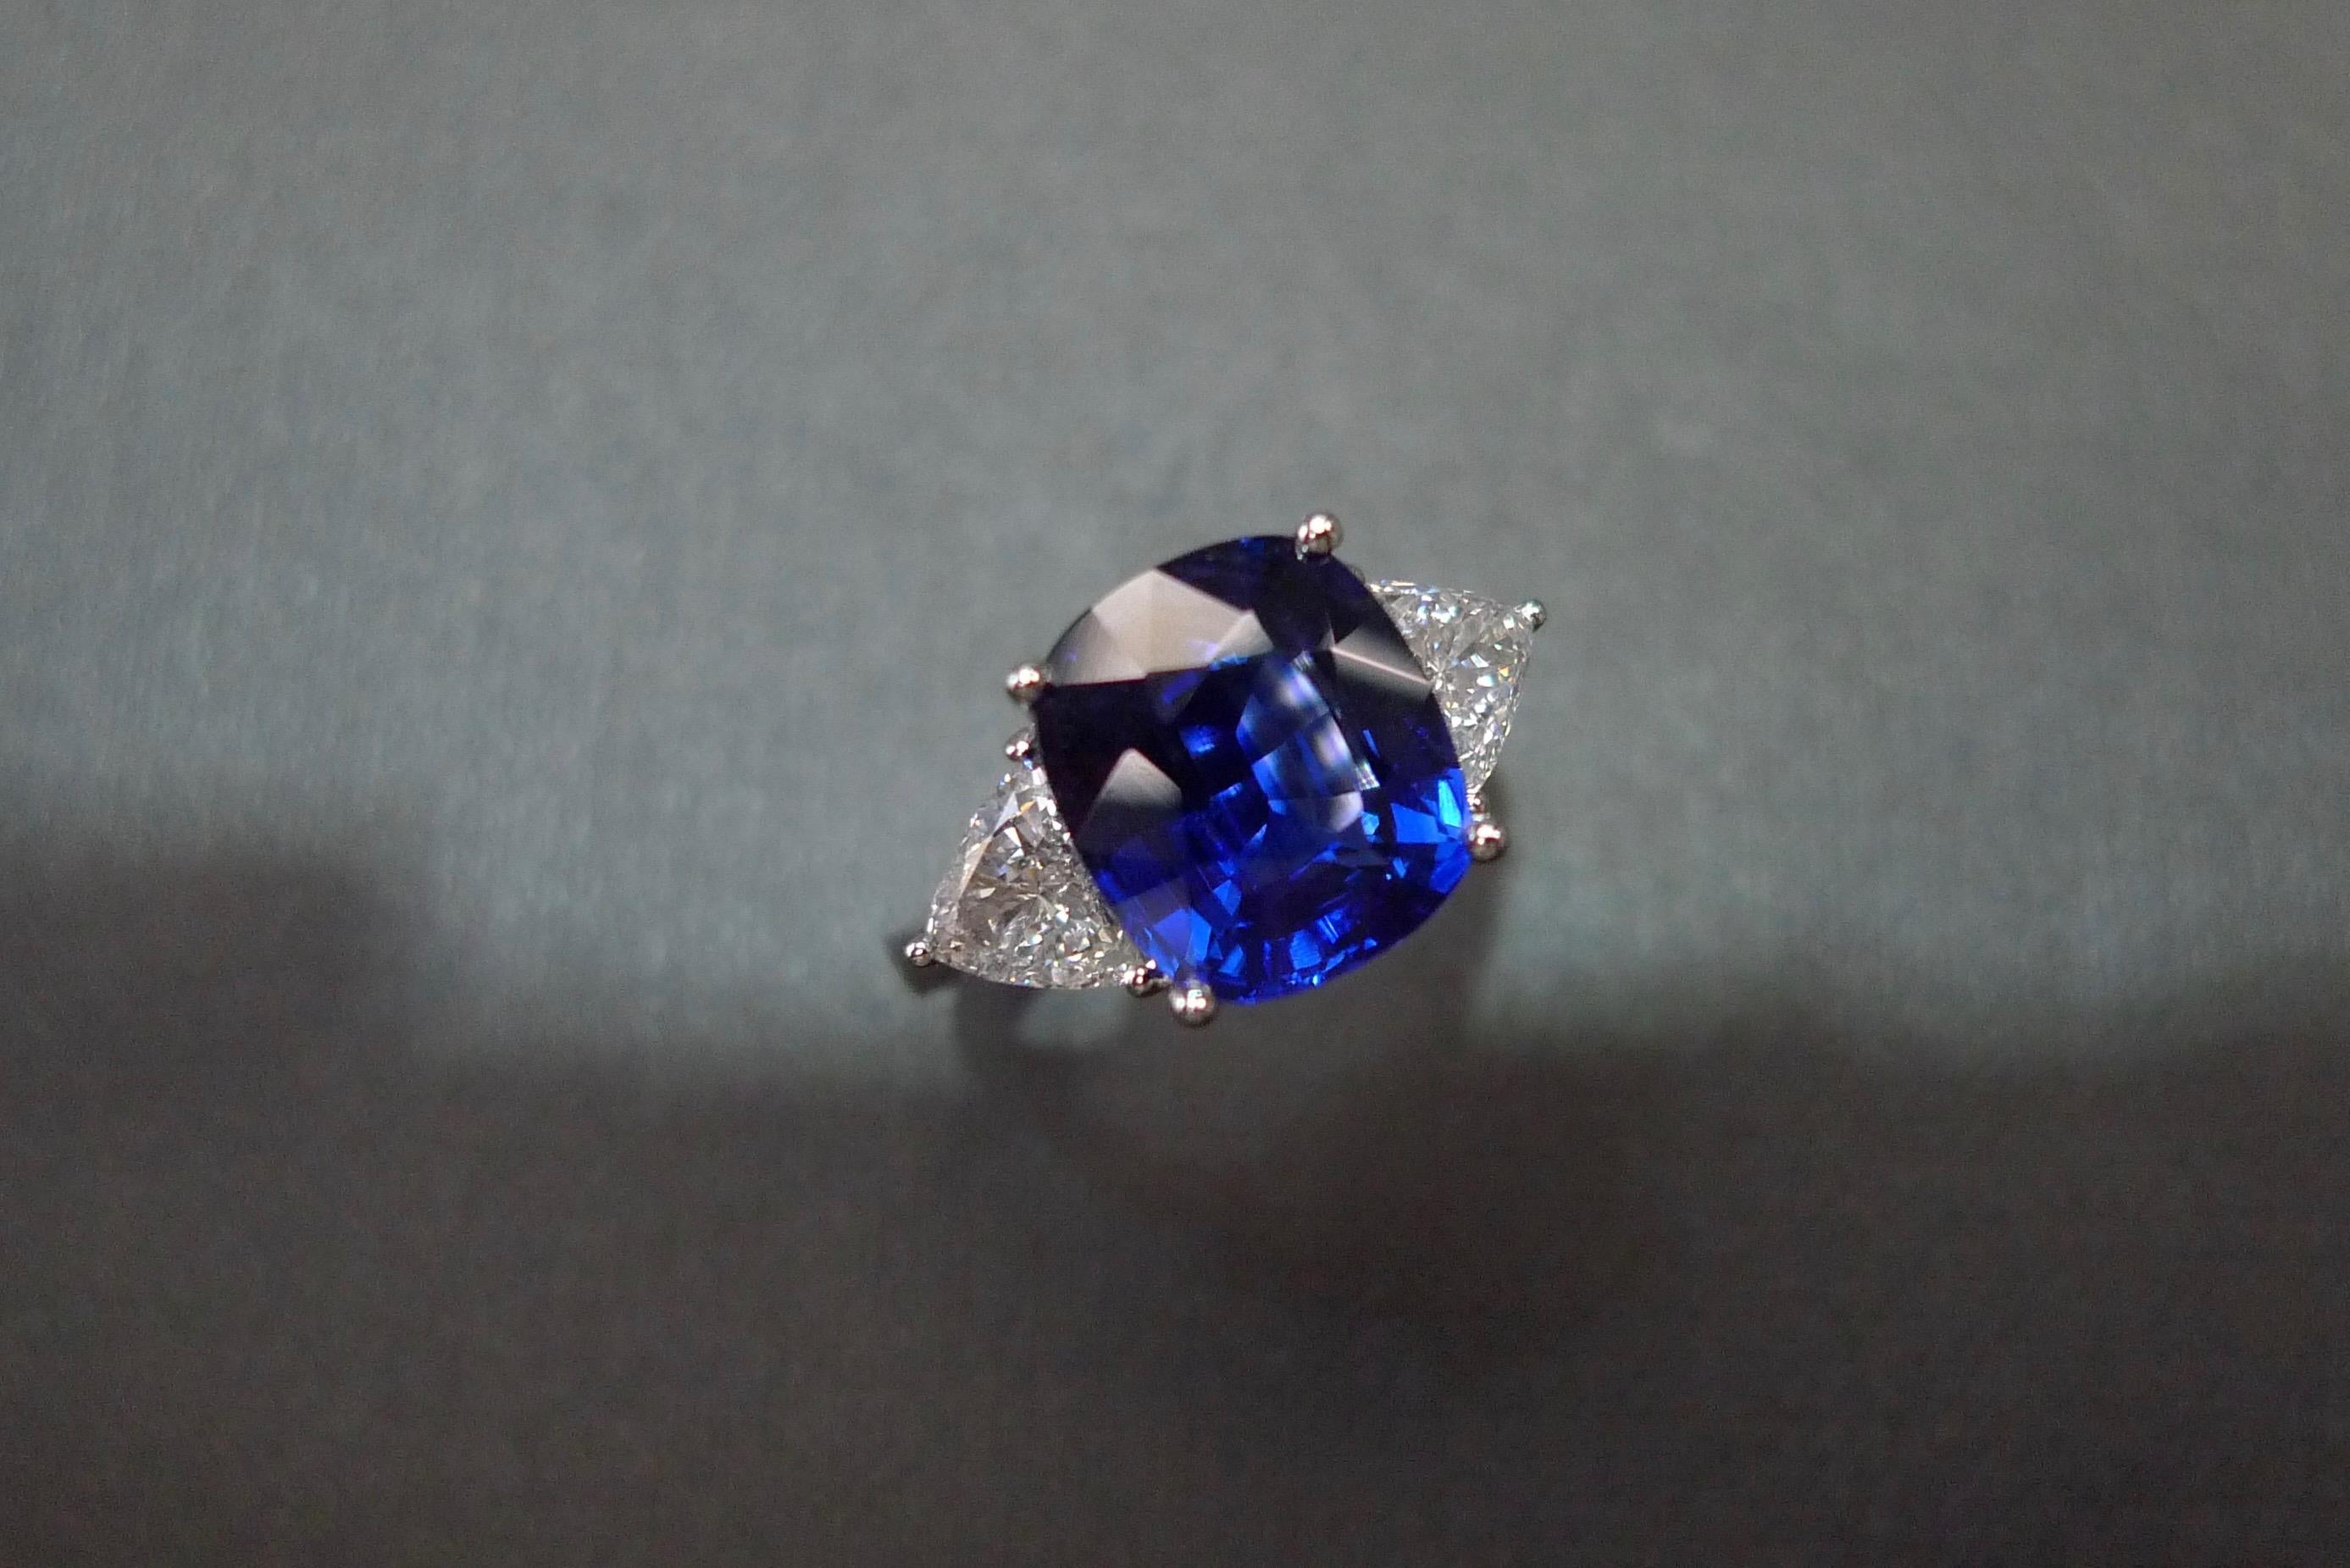 For Sale:  GRS Certified 4.82ct Cushion Cut Blue Sapphire and Triangle Cut Diamond Ring 7